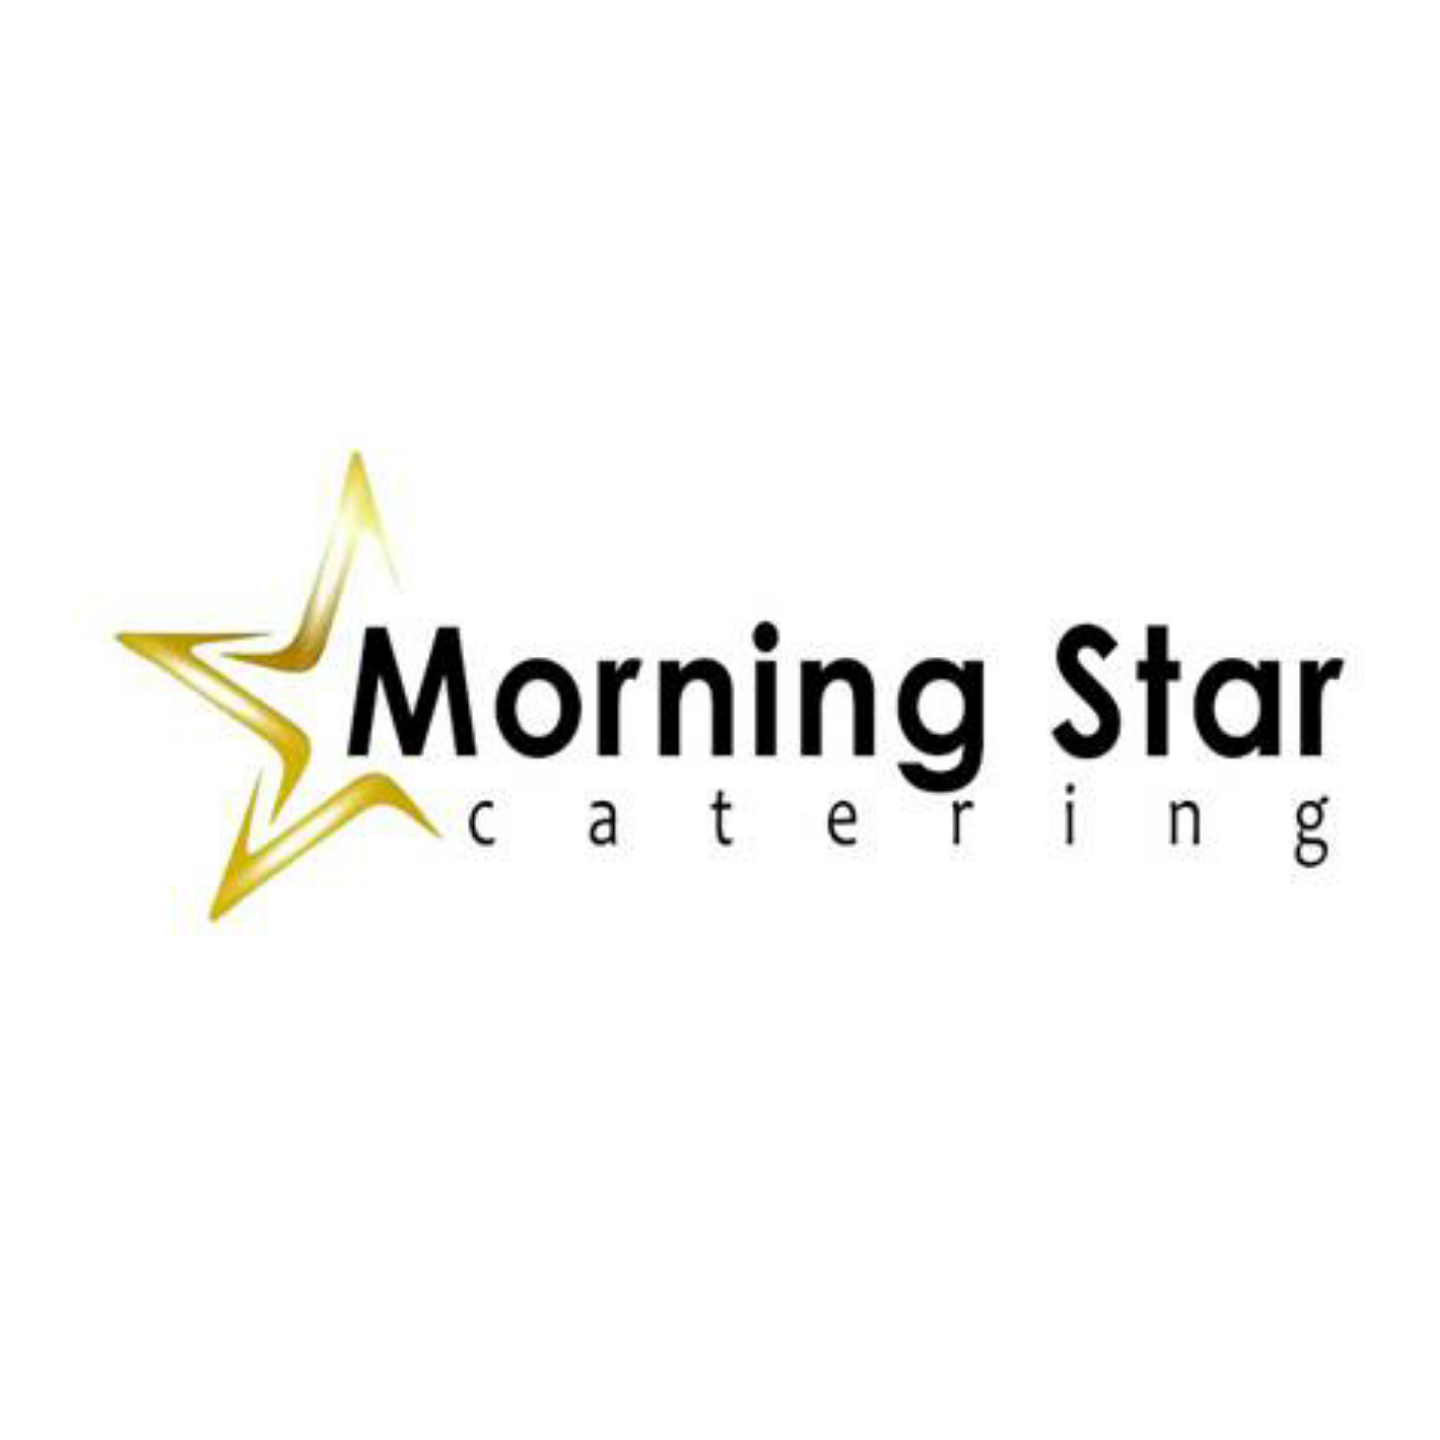 Morning Star Catering - Charlotte, NC 28262 - (704)531-7827 | ShowMeLocal.com